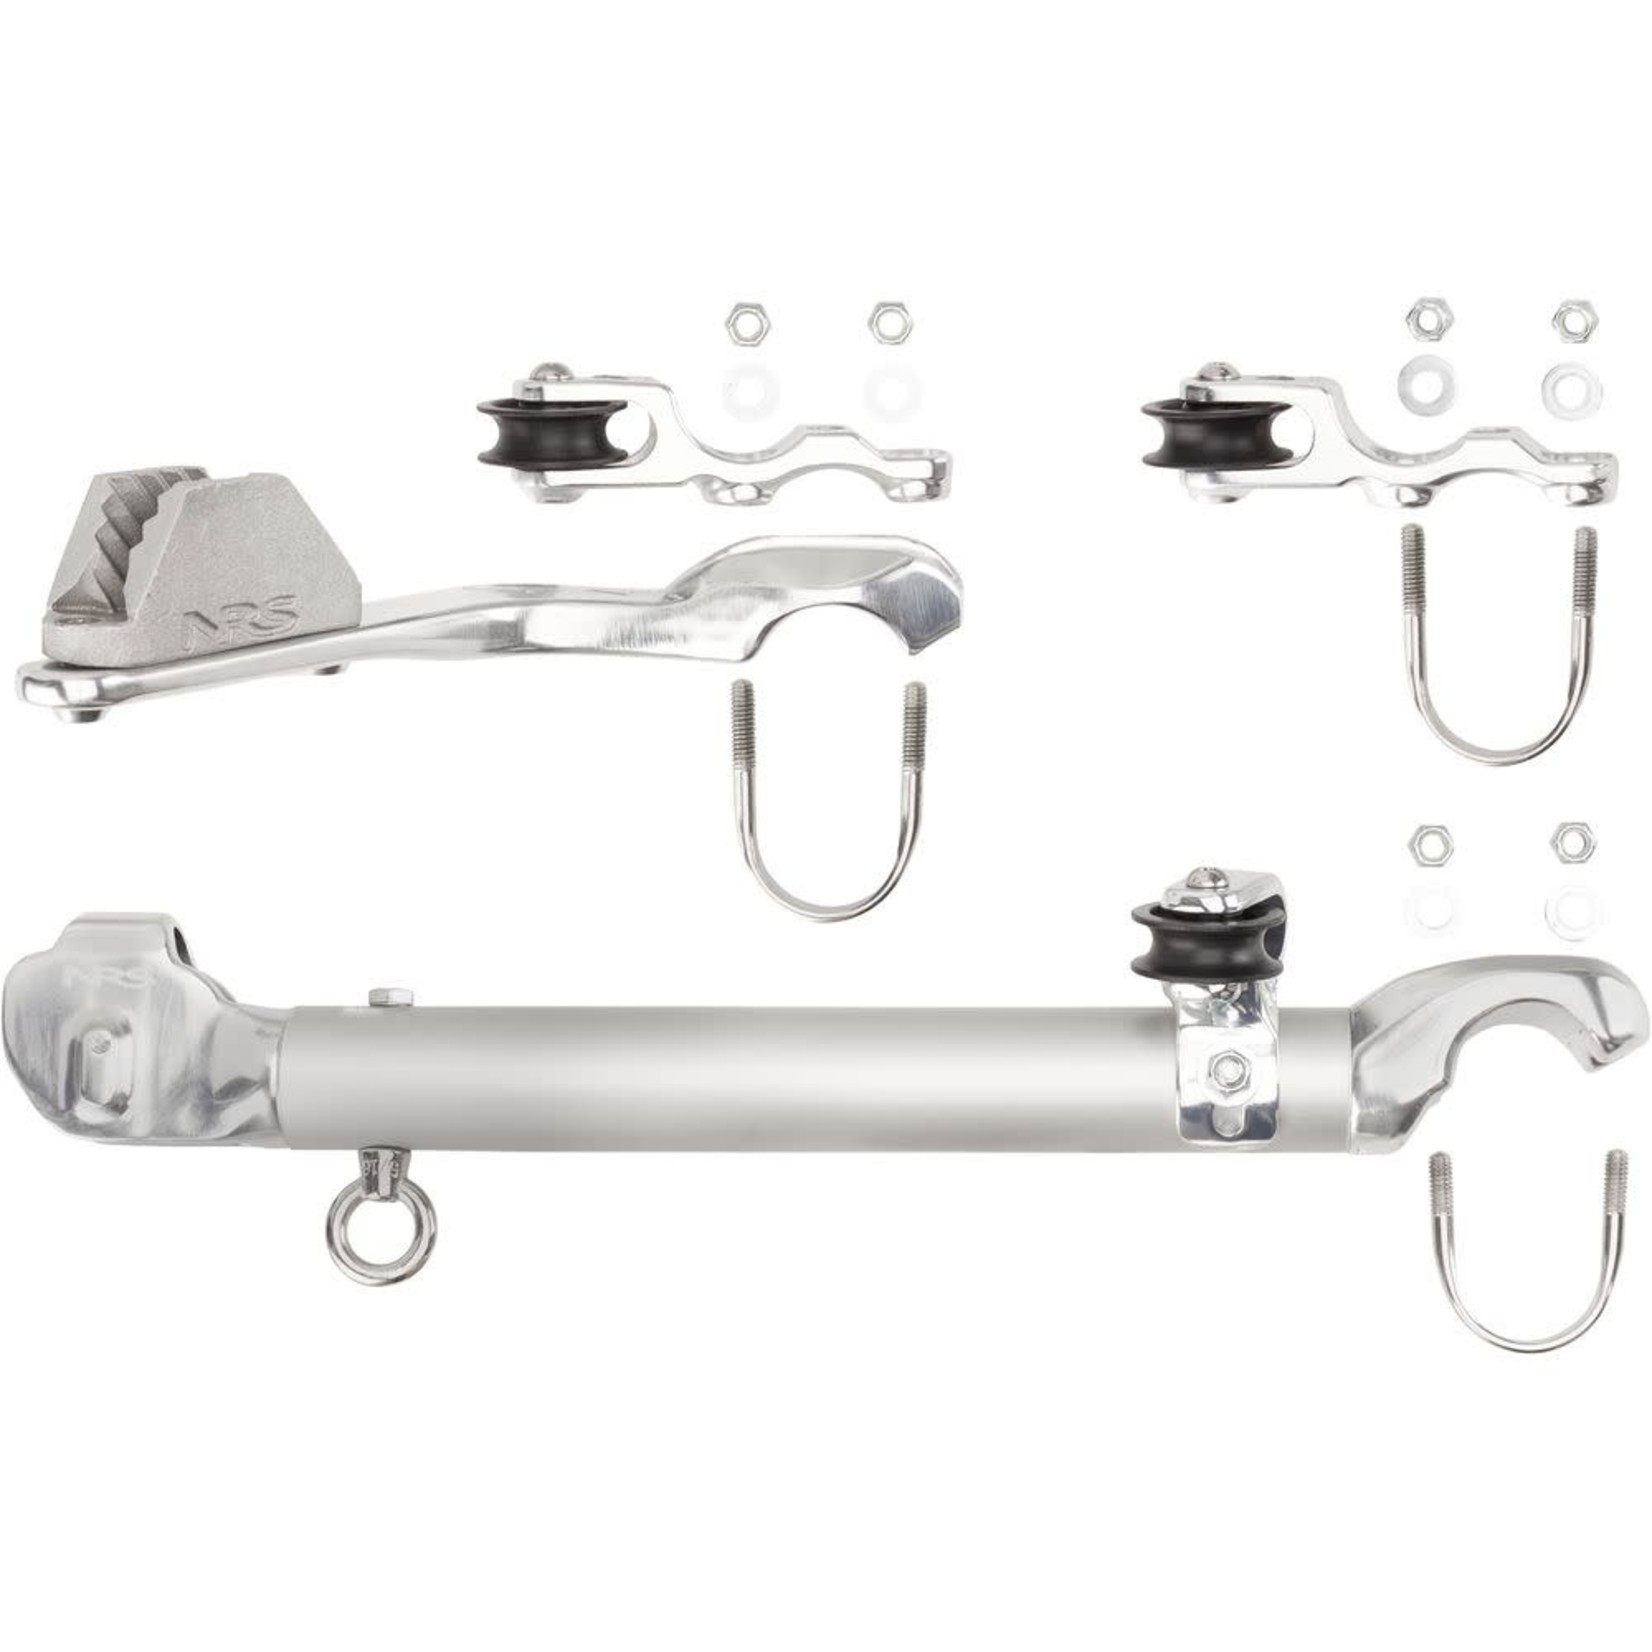 NRS Frame Anchor System with 2:1